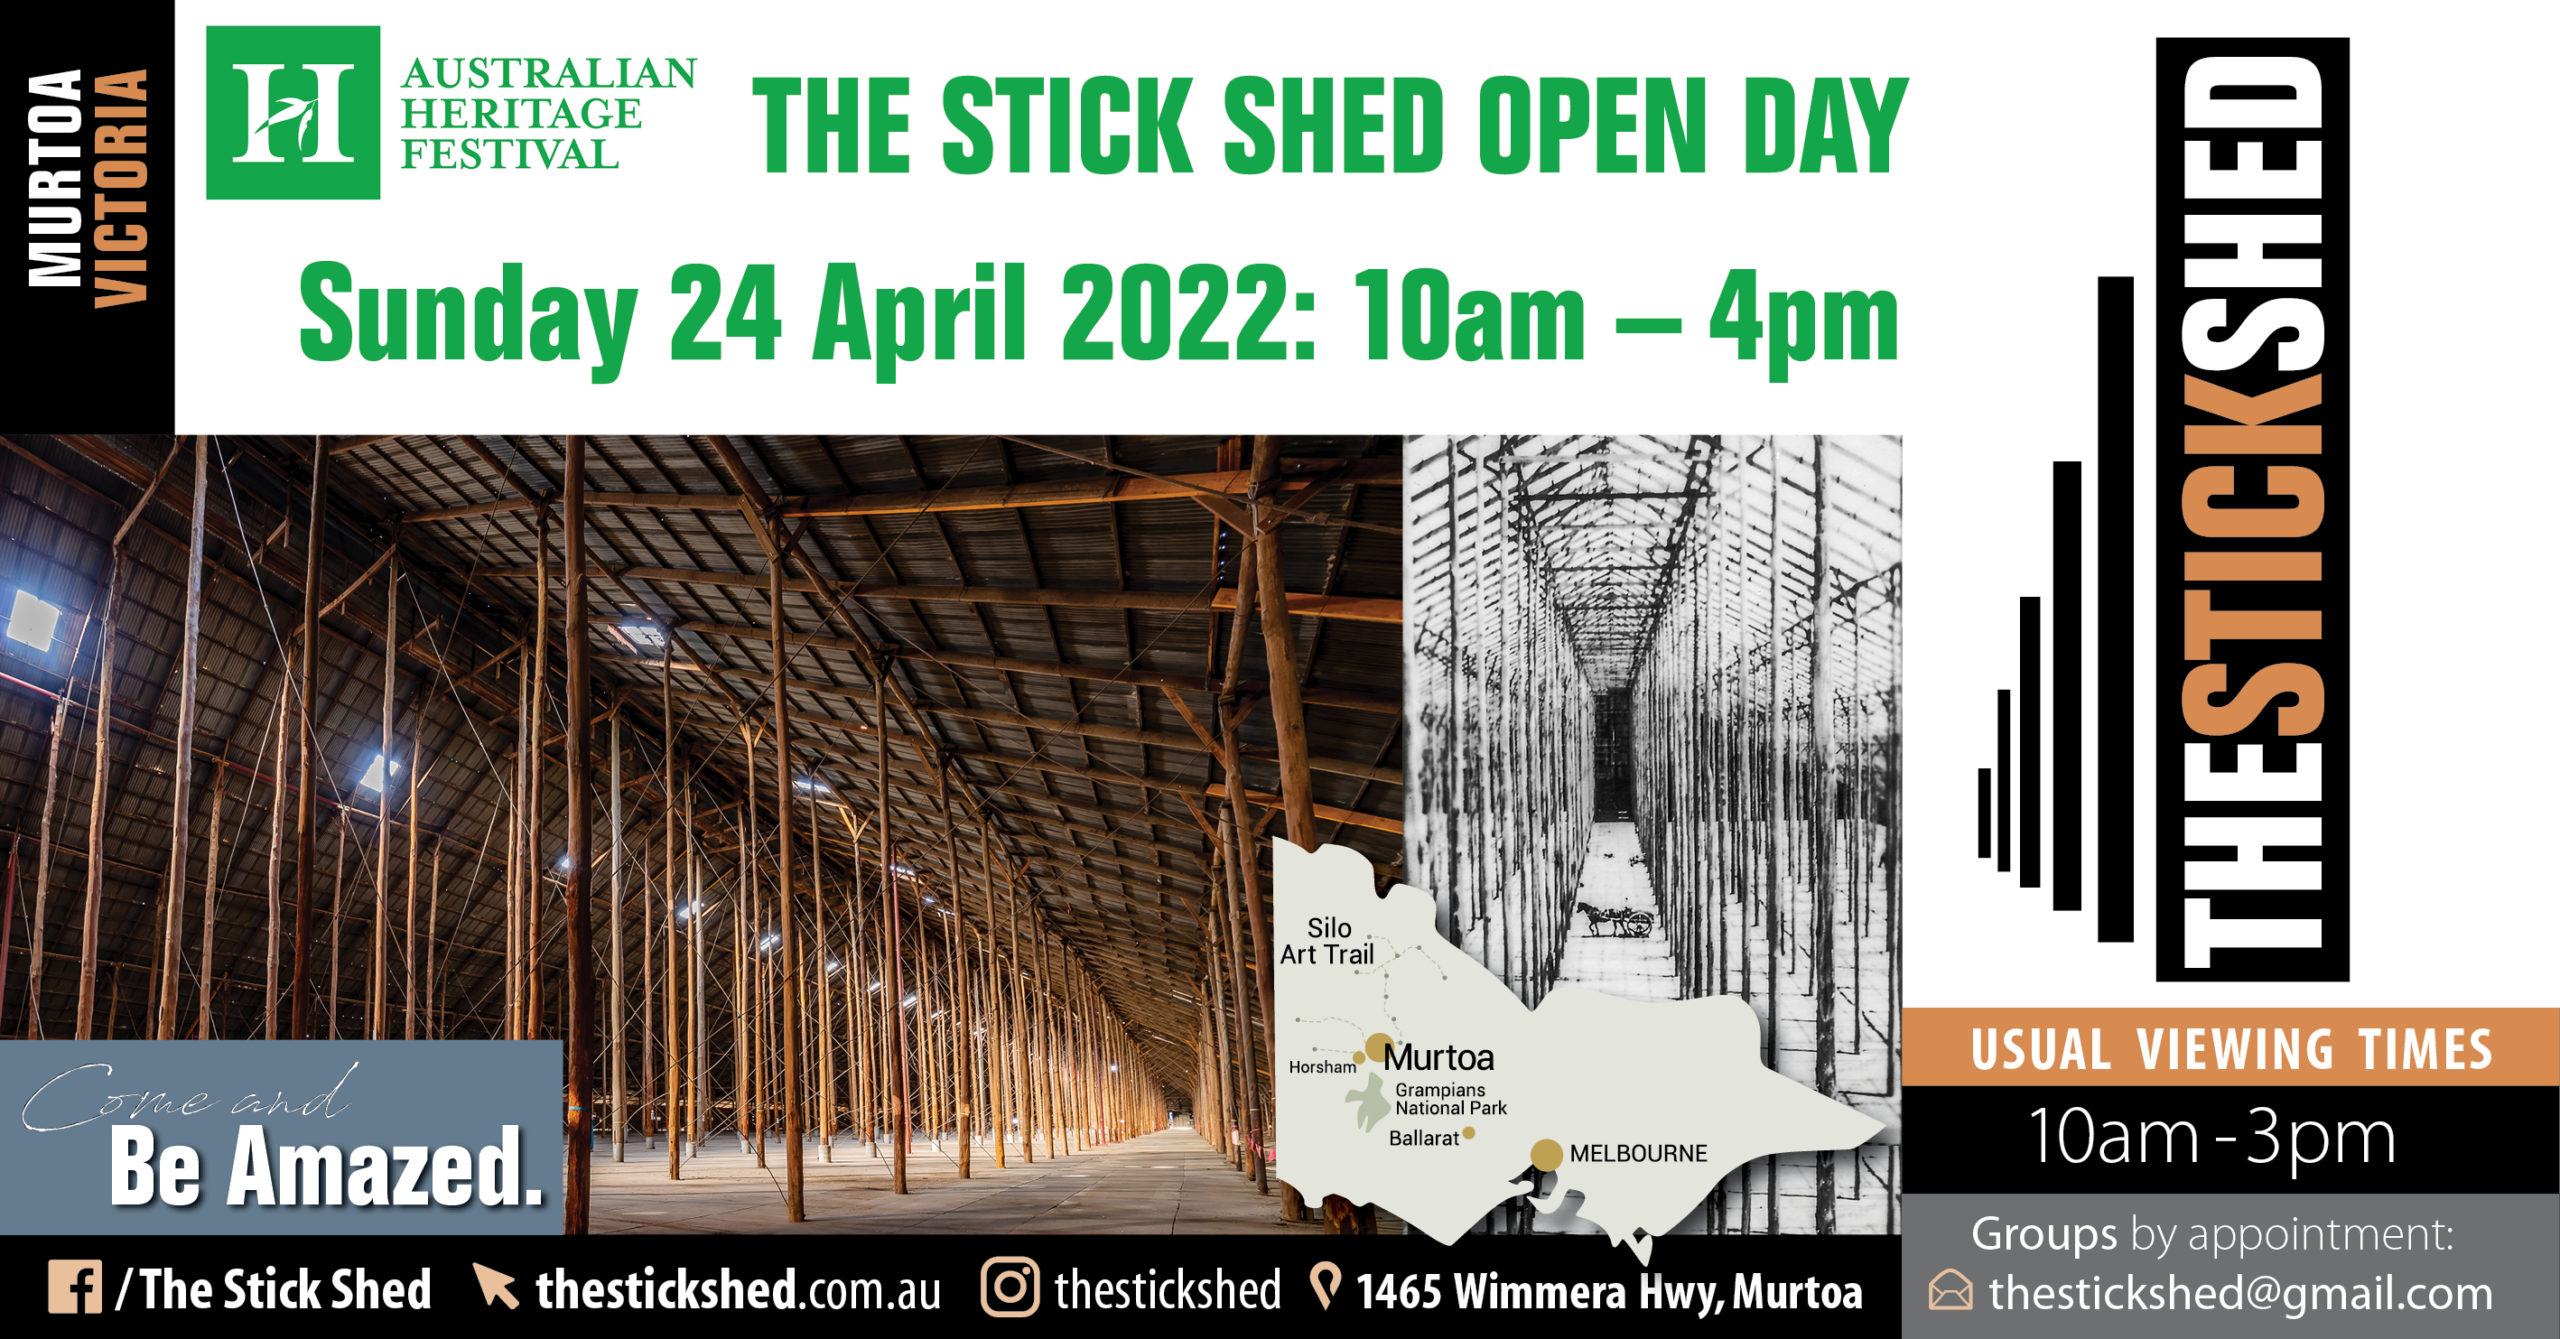 Stickshed Austherfest Openday Fb Graphic